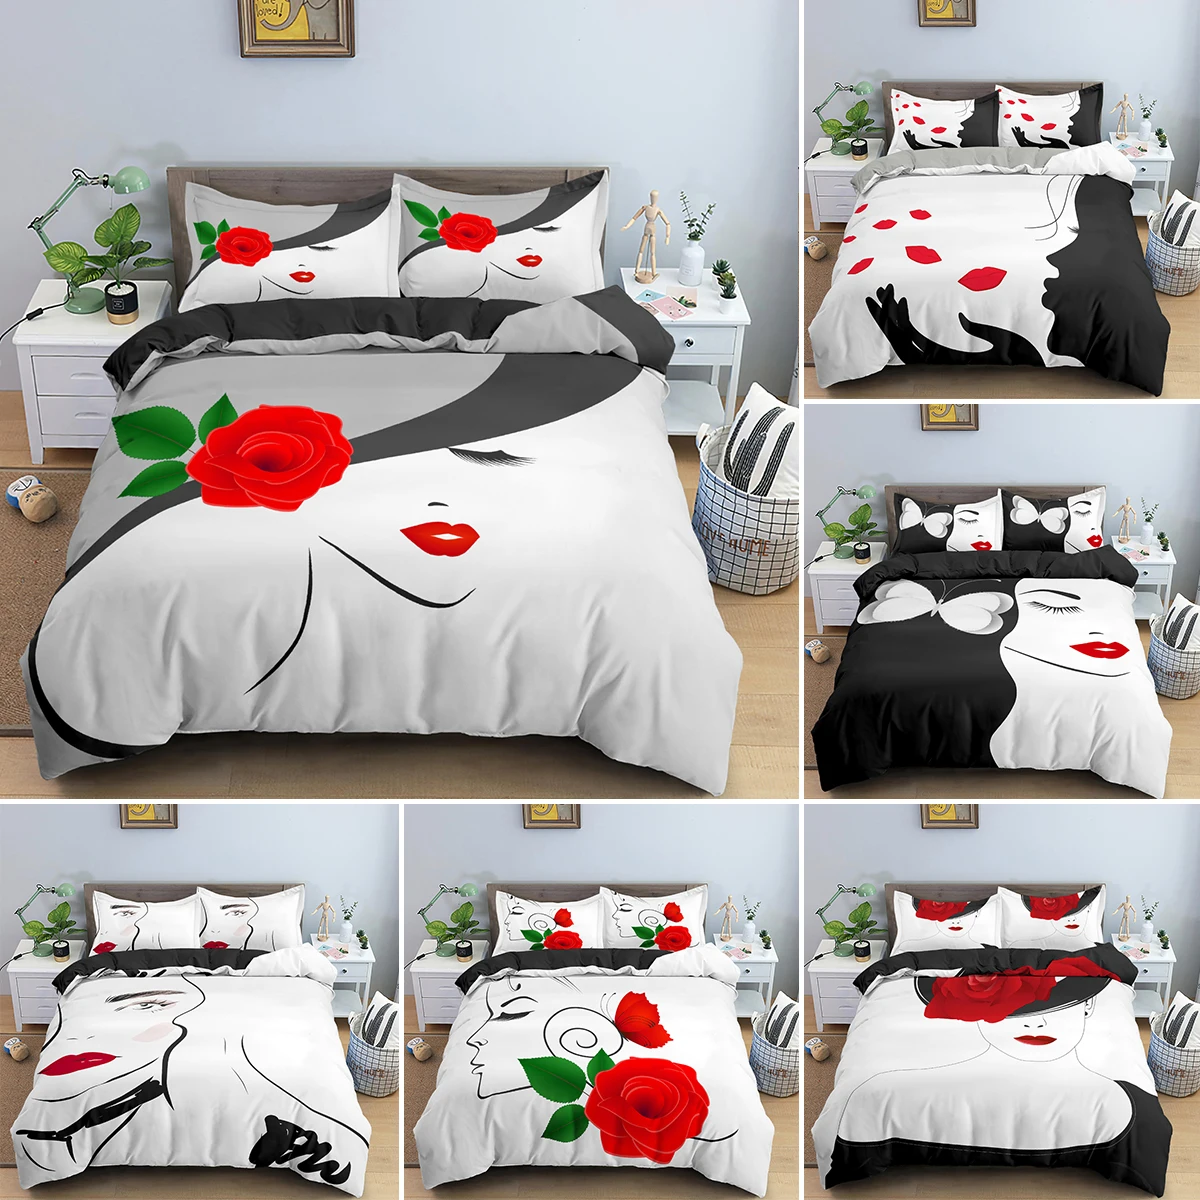 

SALE Duvet Cover/ Quilt Cover/Comforter Cover Size 140*210/173*218/203*228/220*240/228*264 Free Shipping (Sheet Not Included）